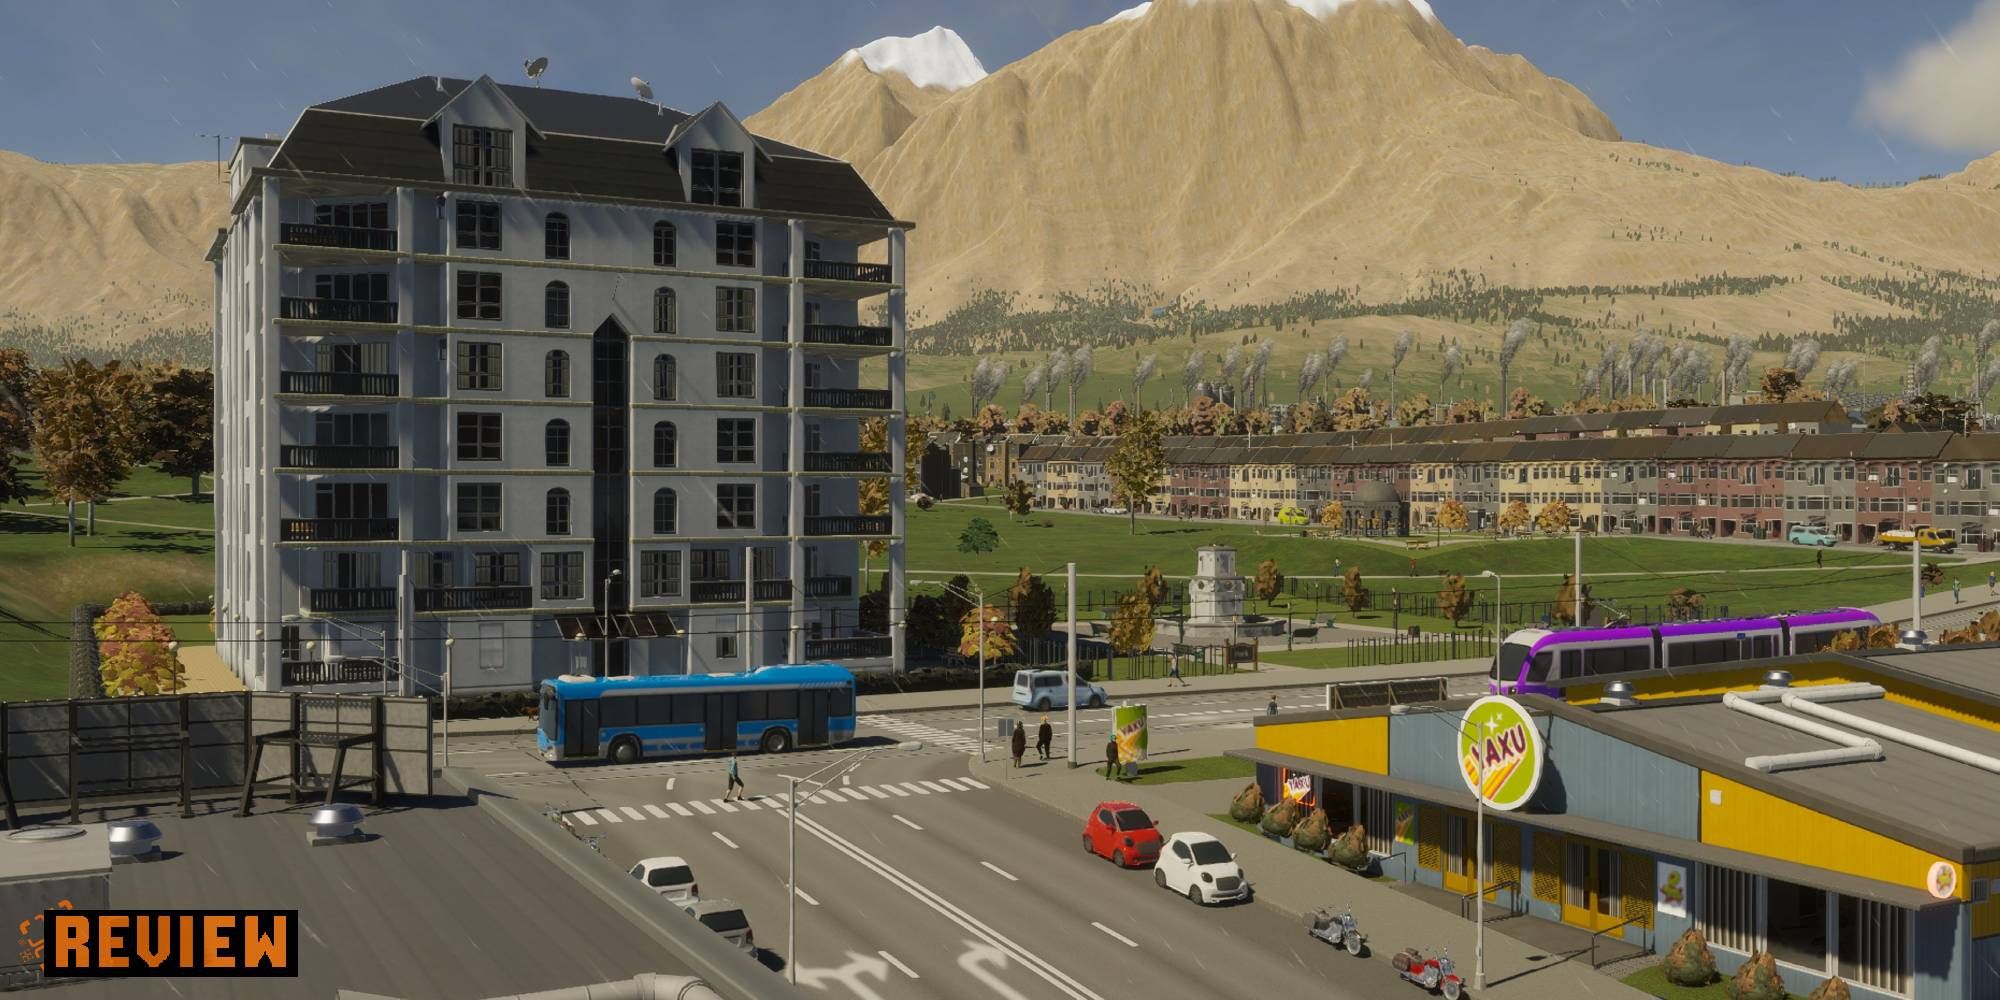 Cities: Skylines 2 Performance Has not achieved the